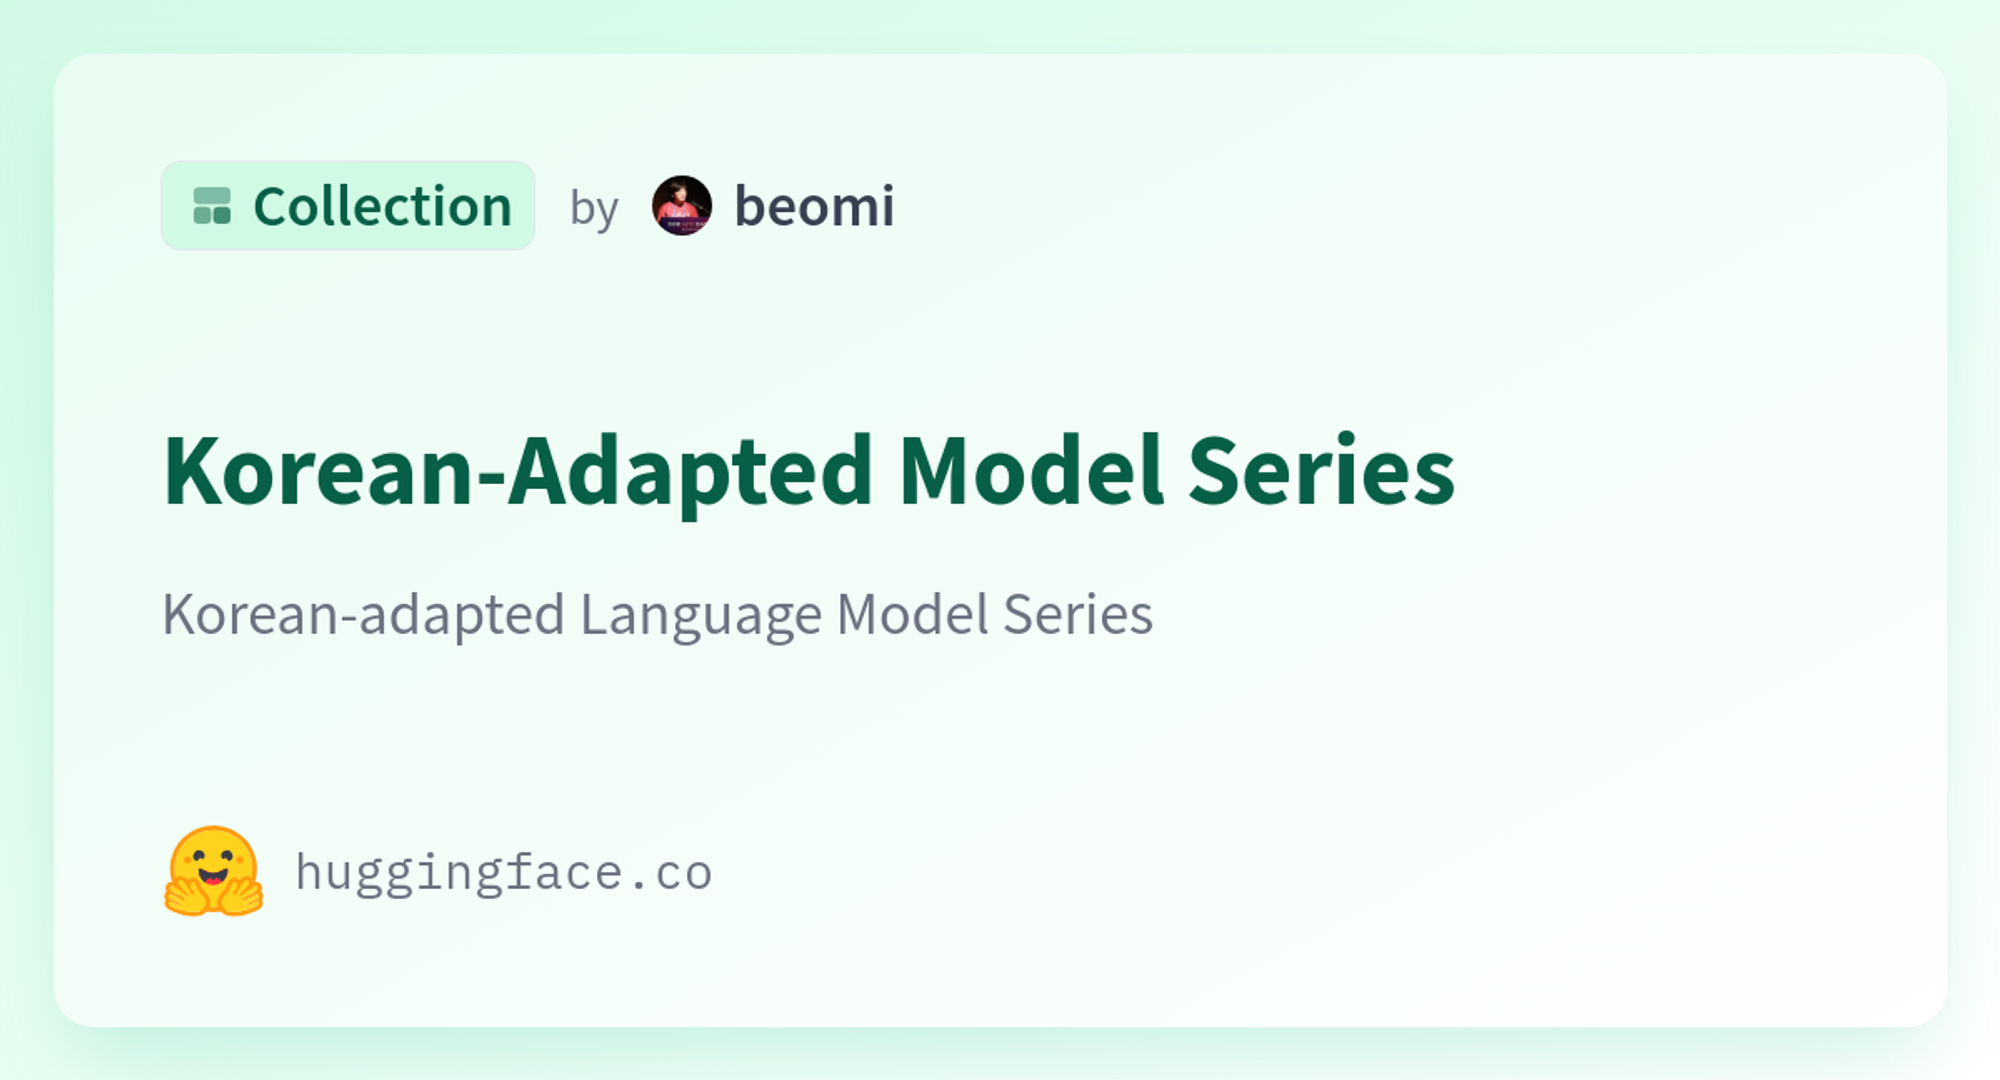 Korean-Adapted Model Series - a beomi Collection